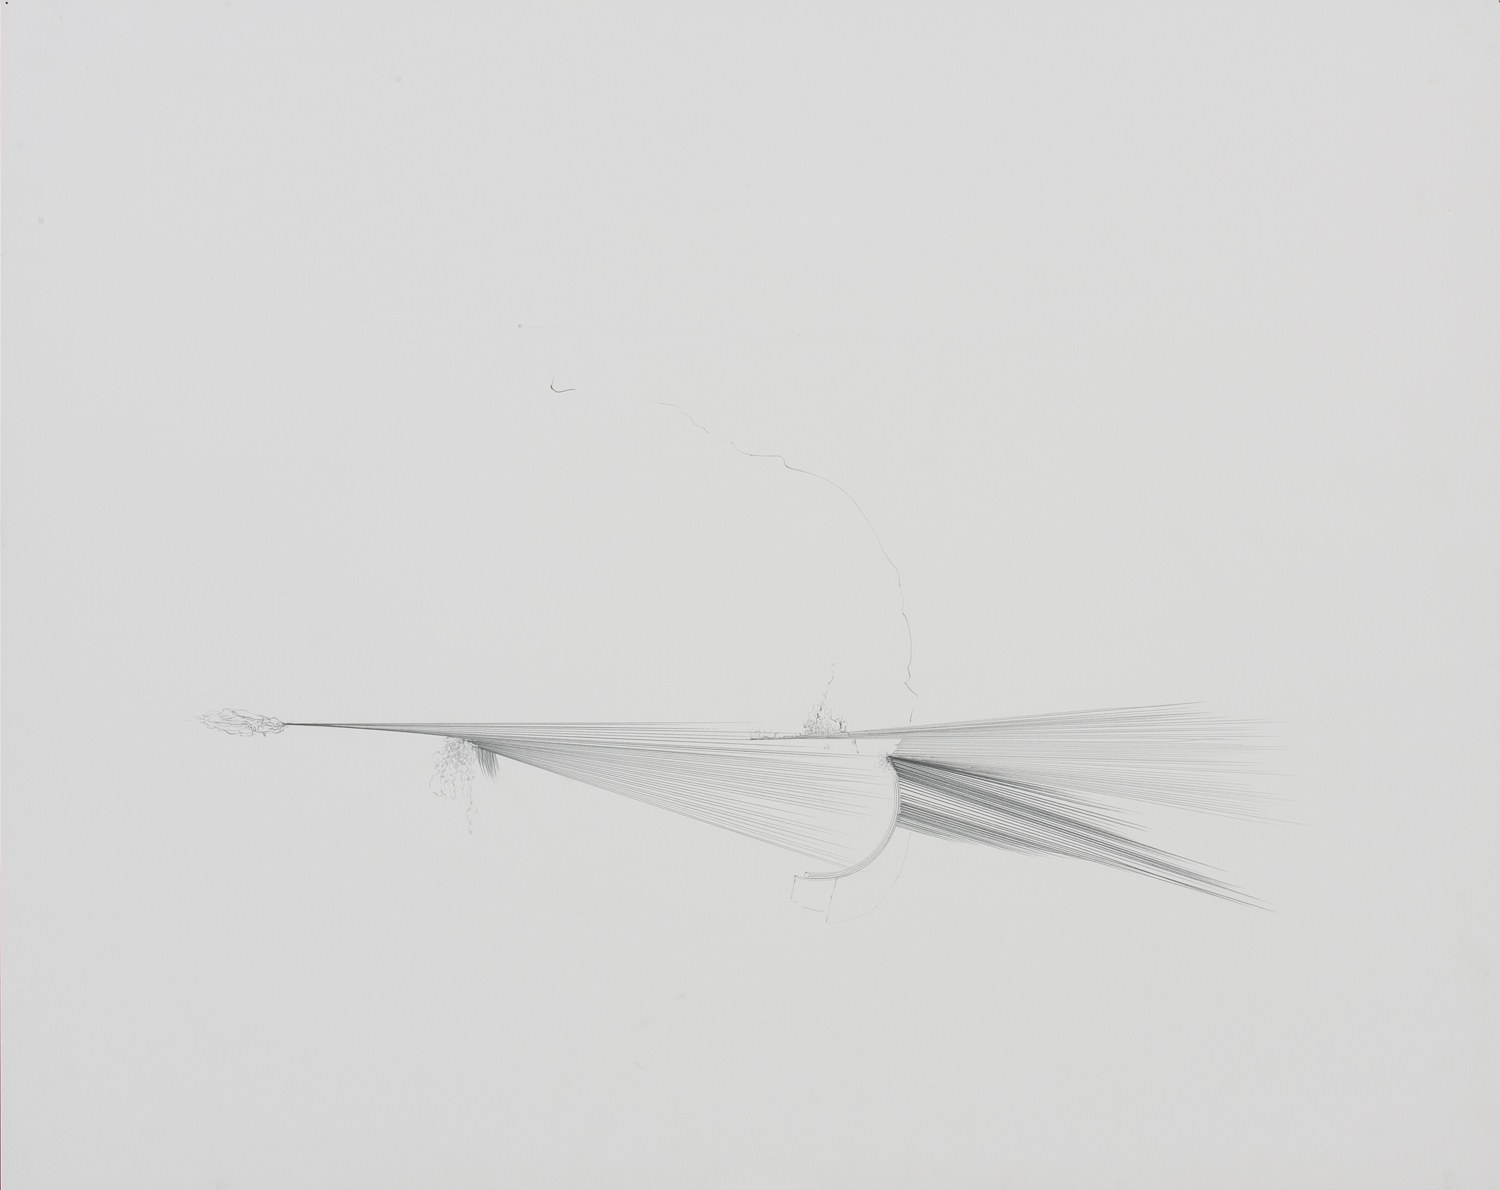  untitled, graphite on paper, 2005, 22 x 30 inches 